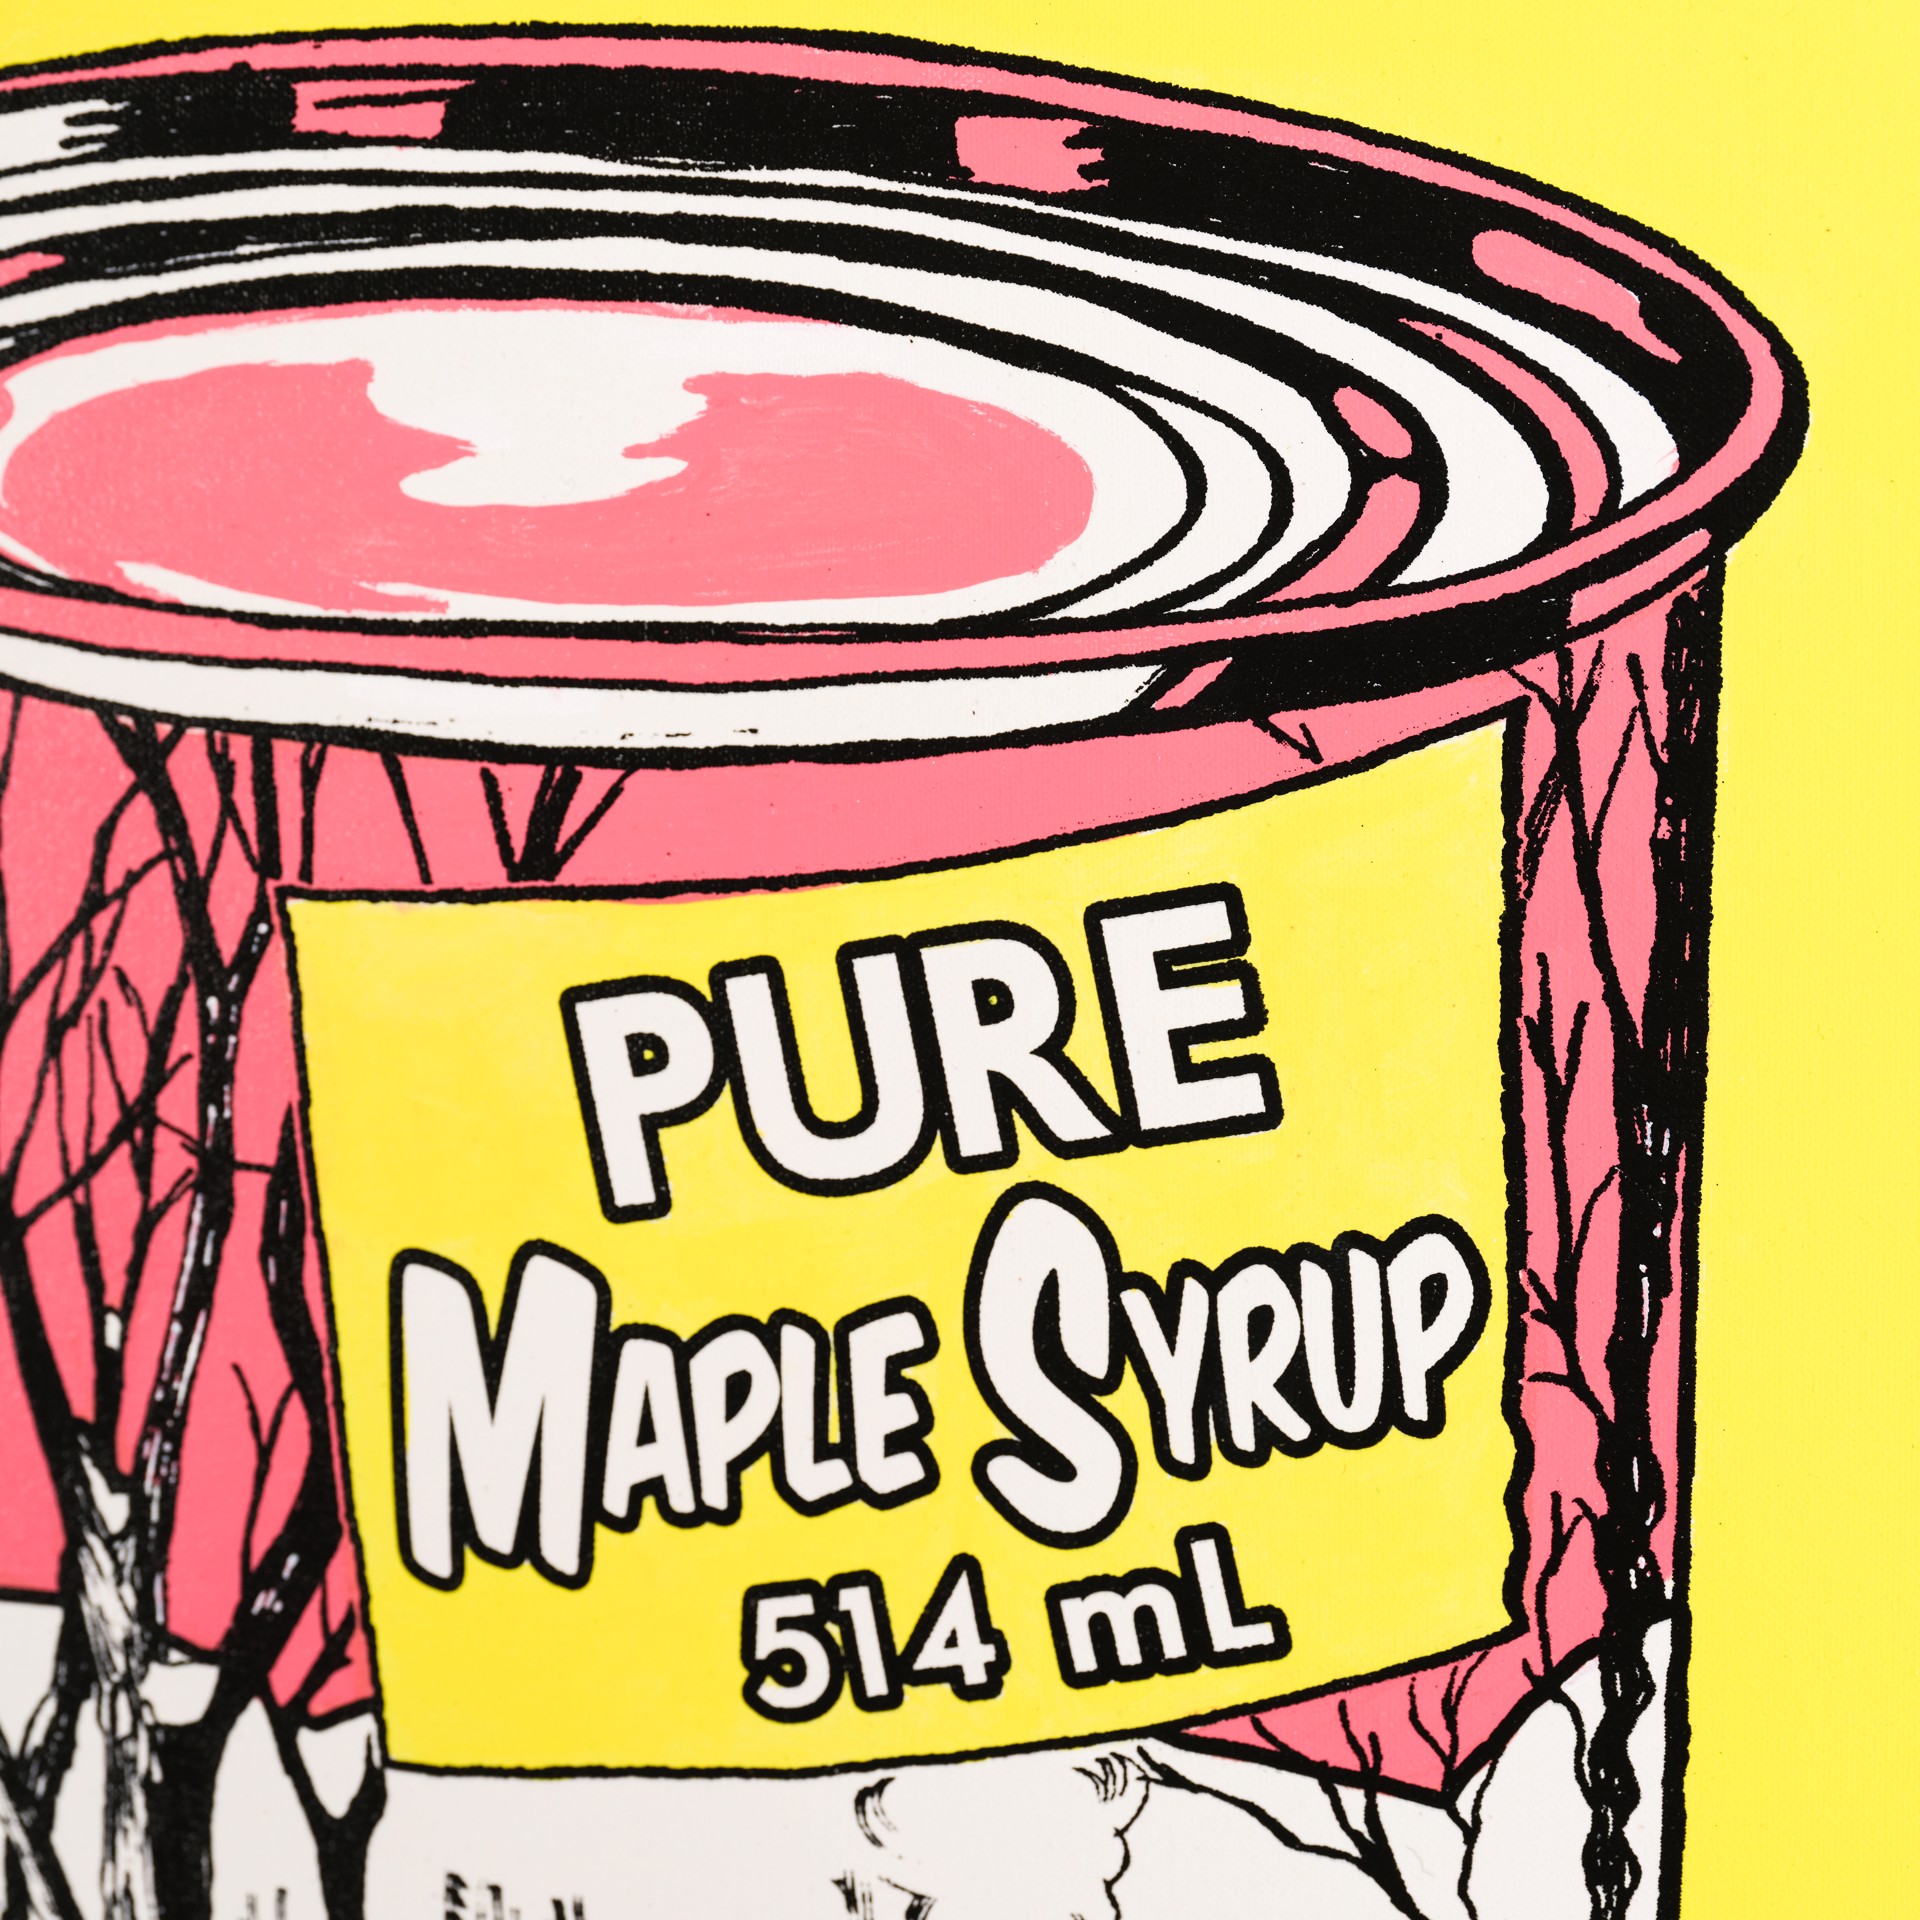 Maple Syrup (Yellow/Red) by Whatisadam